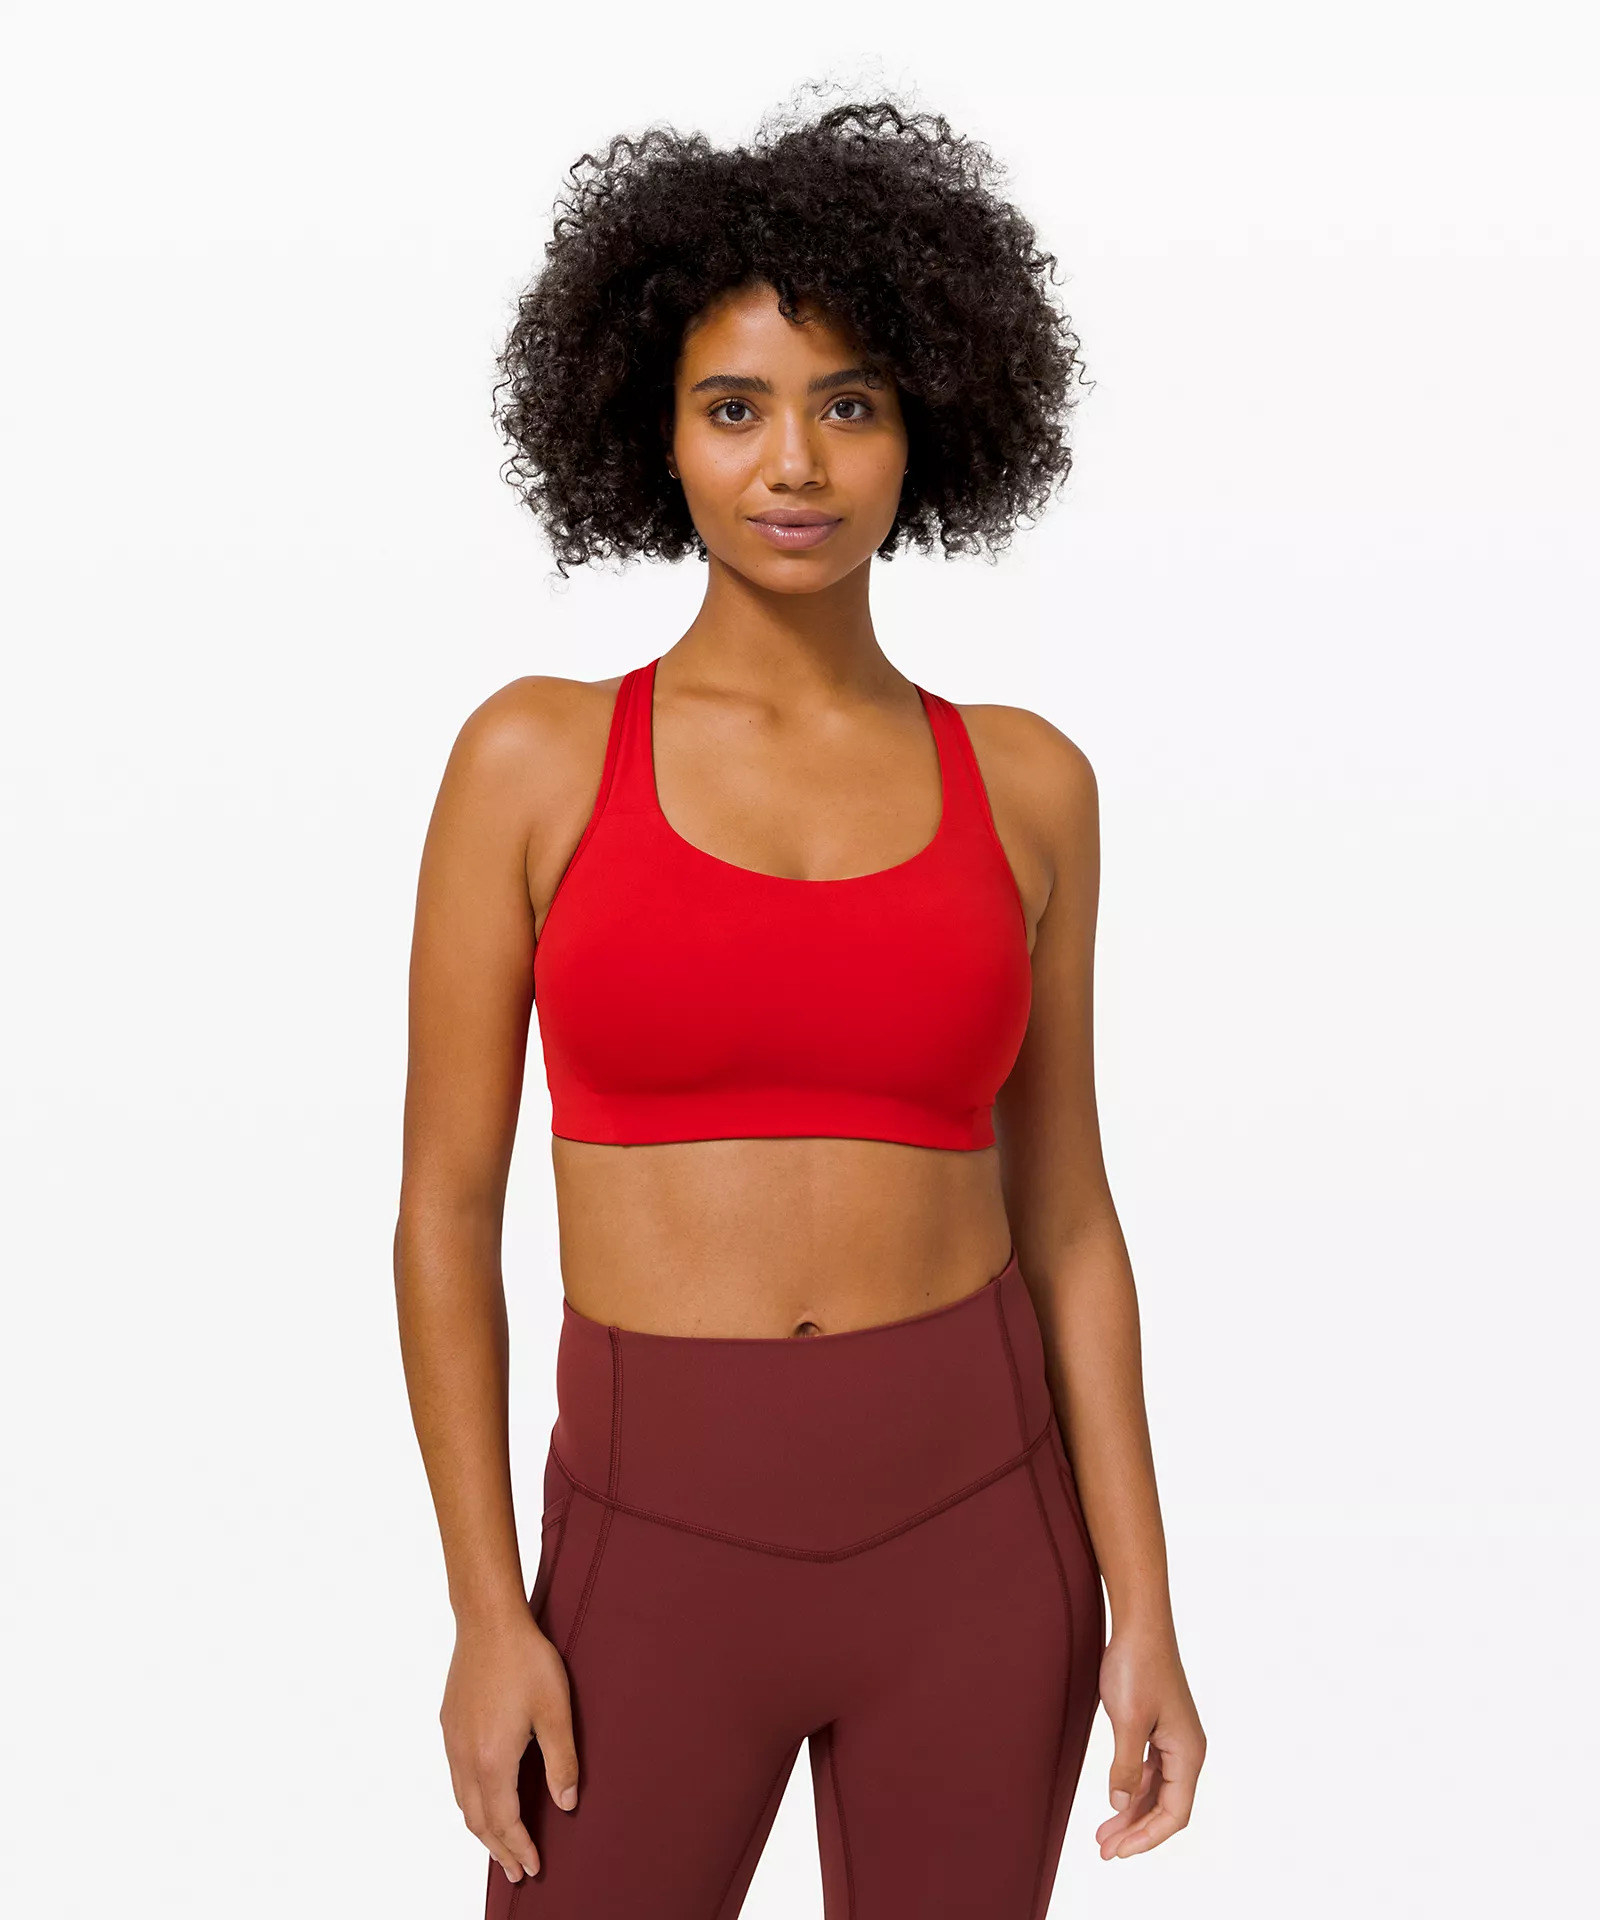 Fit Pic! Wearing the Invigorate Bra (dark red / size 4) and LLL